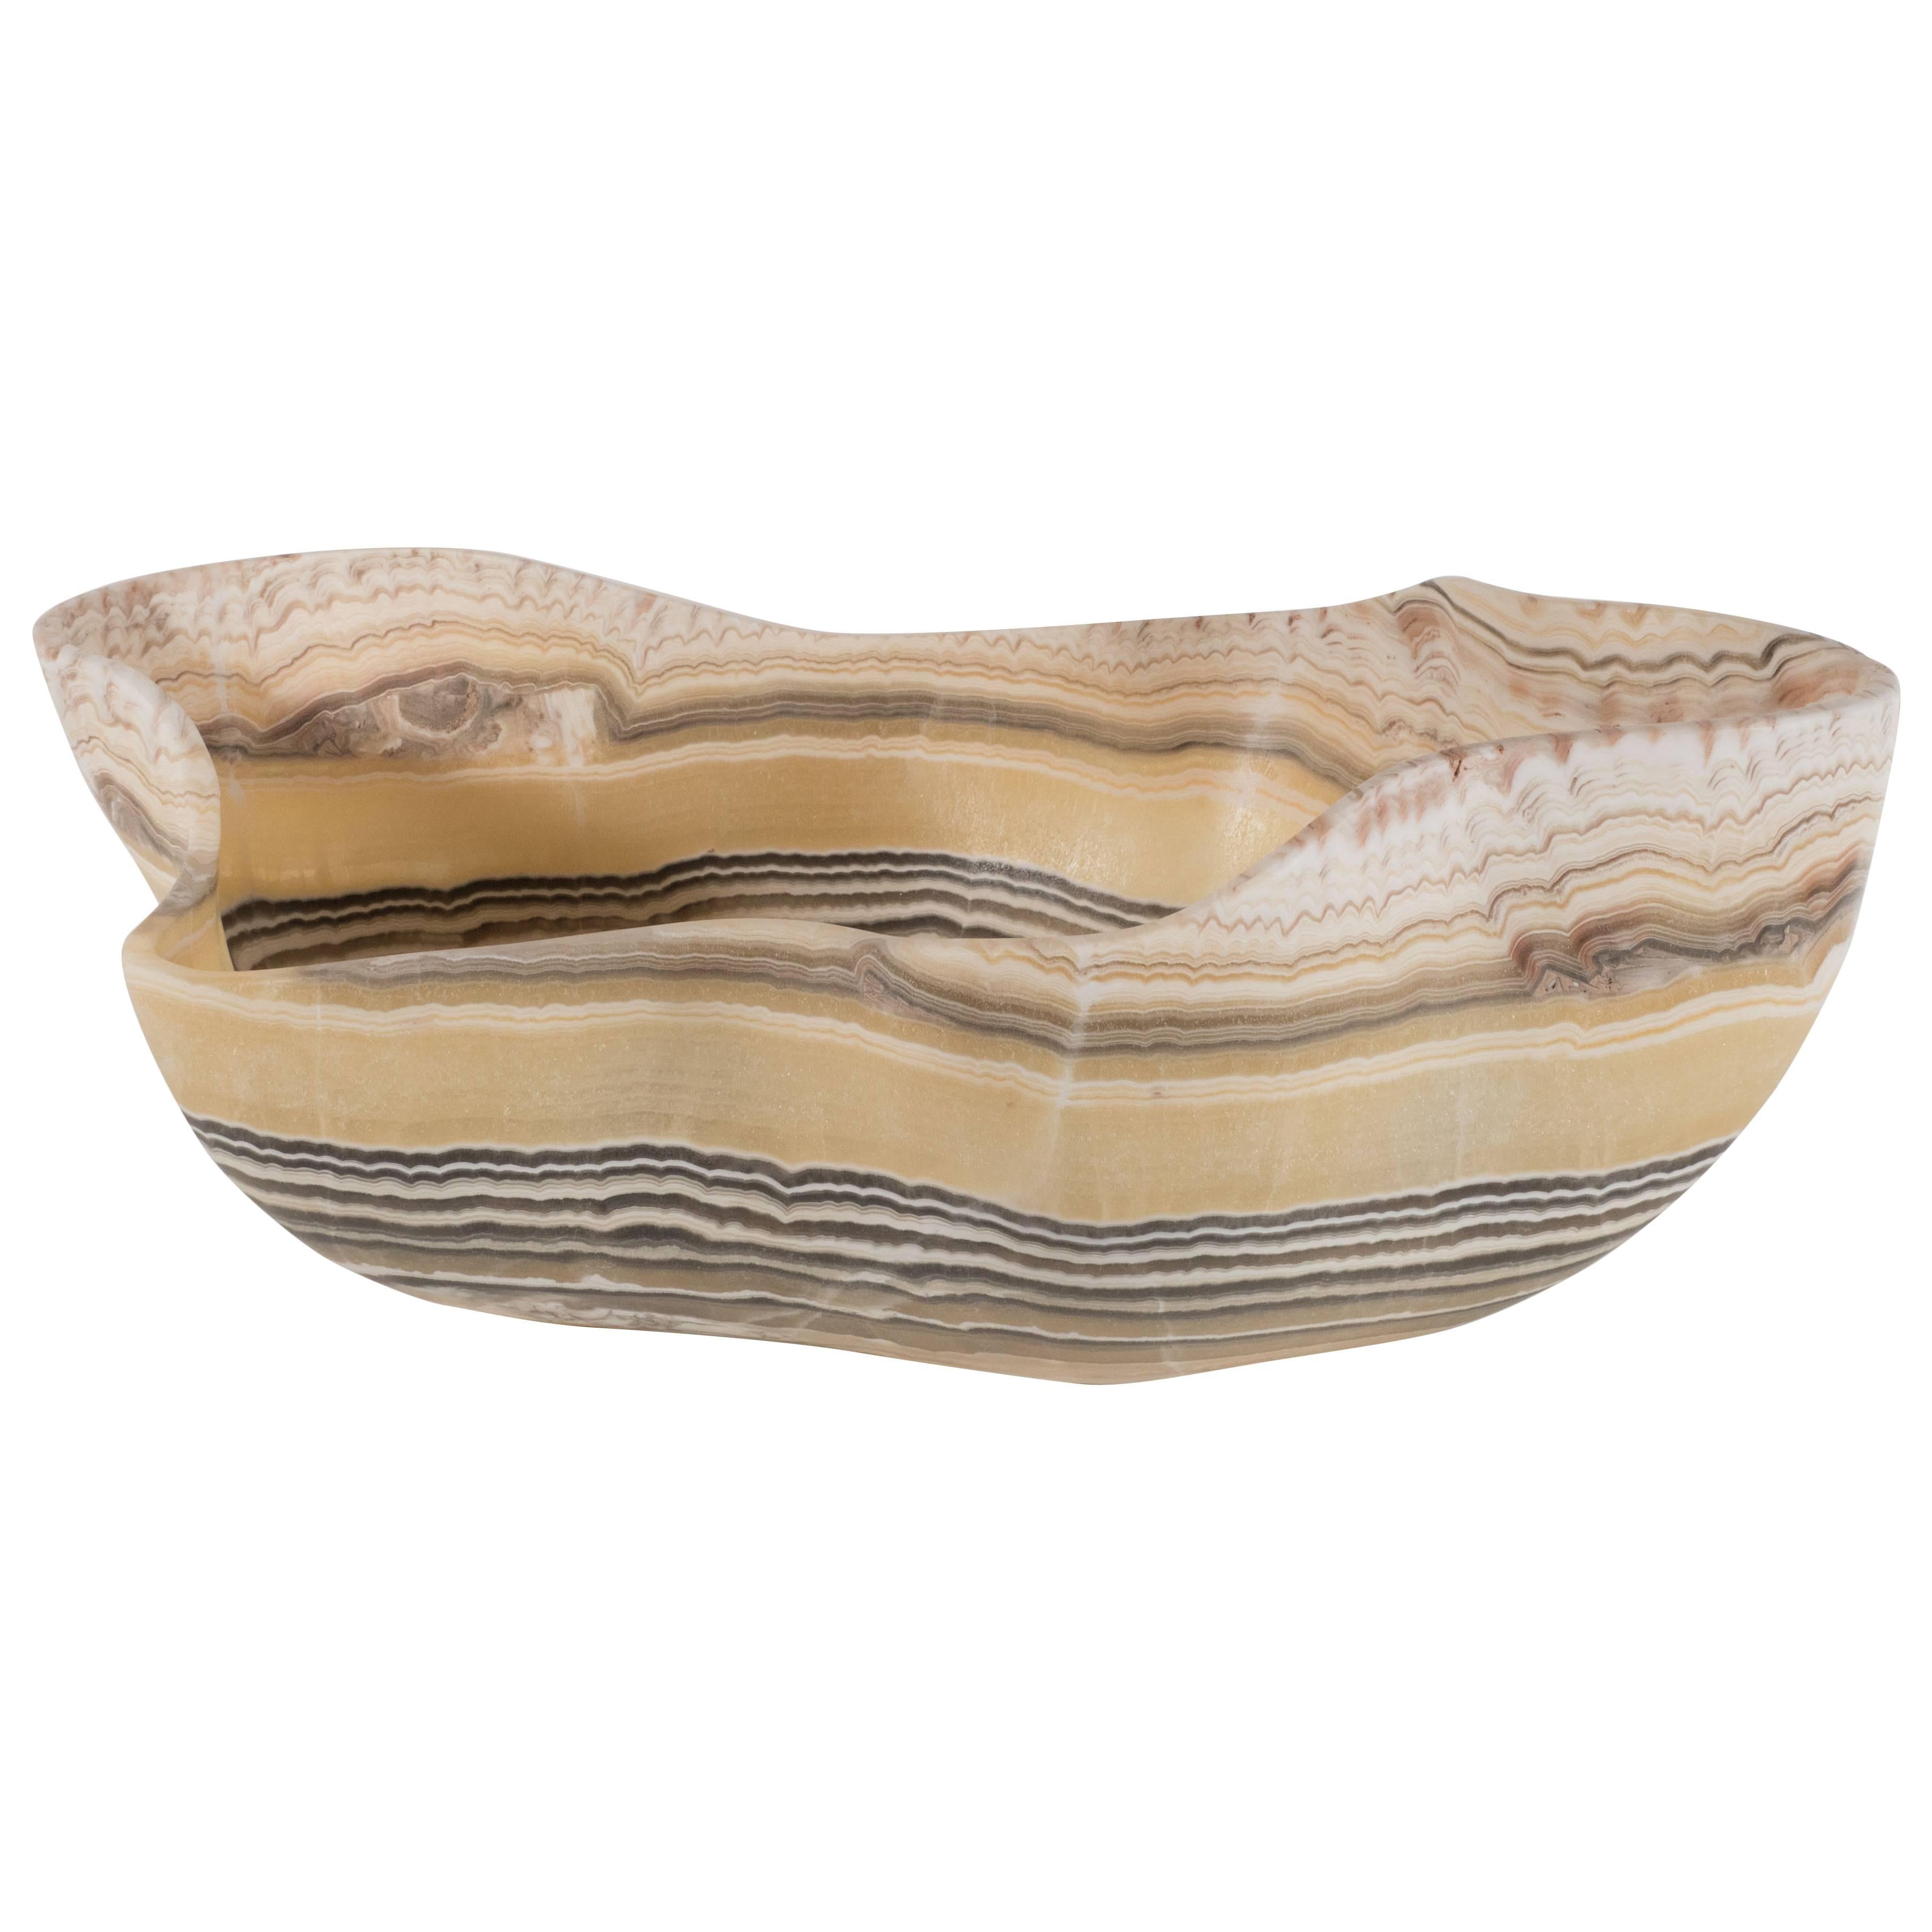 Organic Modern Agate Bowl with Grisaille Bands against a Honeyed Background